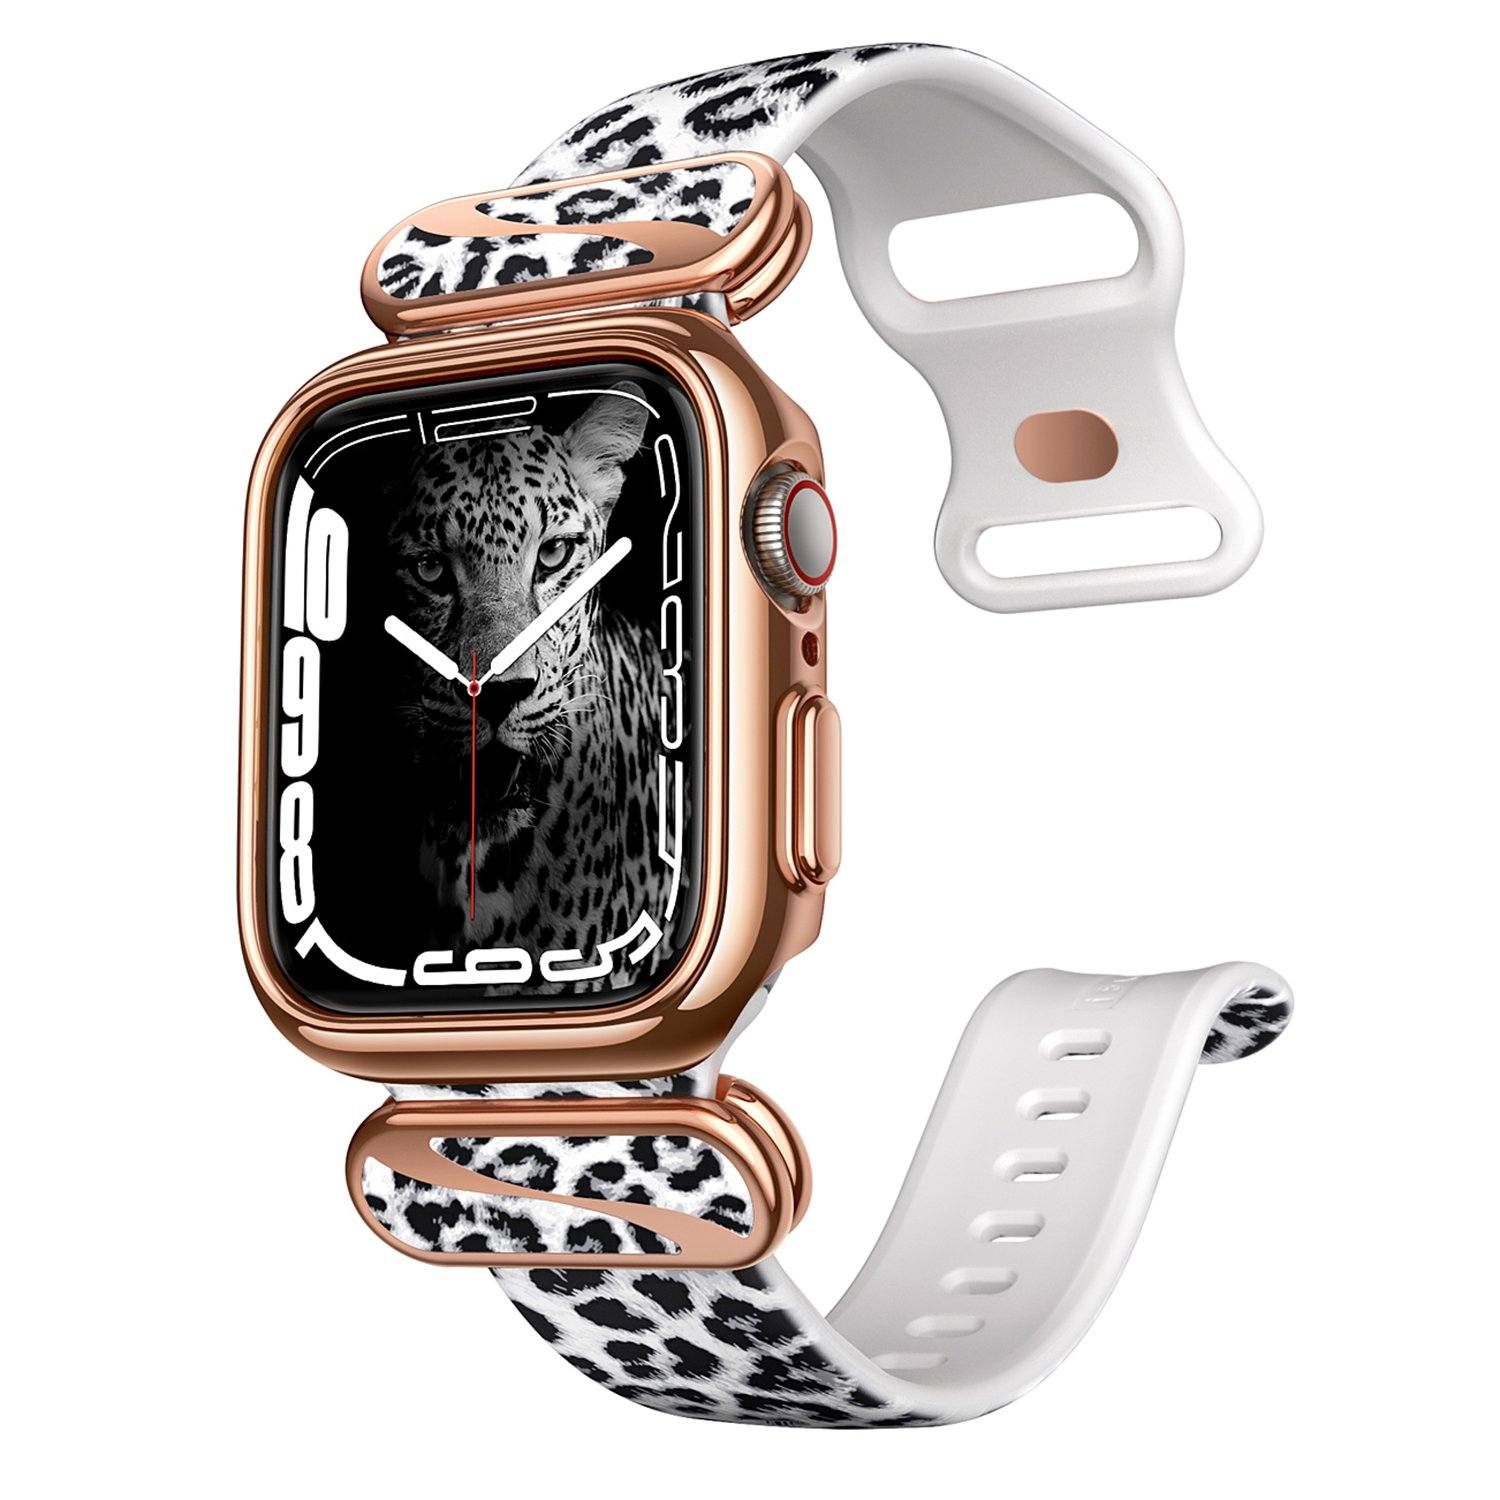 i-Blason Cosmo Stylish Sporty Protective Bumper Case with Adjustable Strap Bands for Apple Watch Series 7/6/SE/5/4 (40mm/41mm) Default i-Blason Leopard 